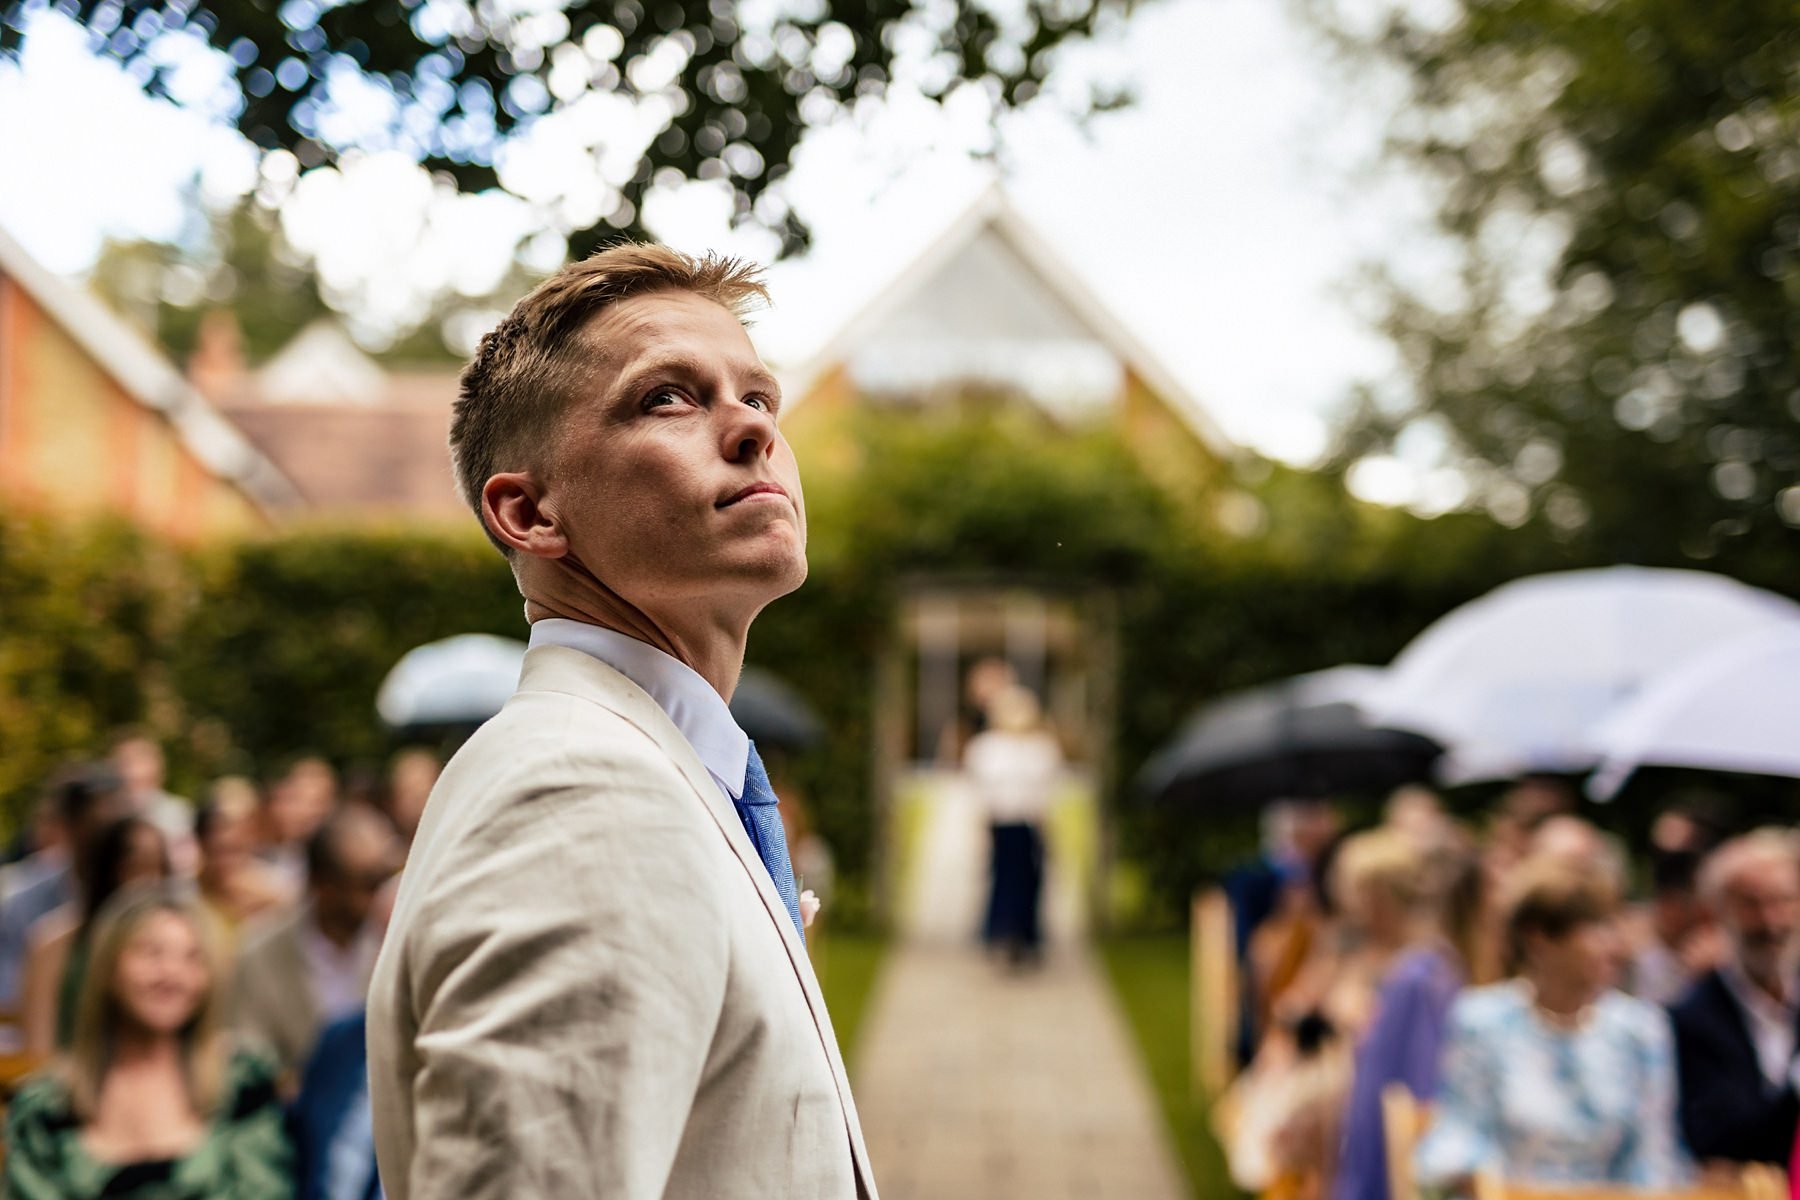 A groom observes the rain as he prepares for his wedding ceremony at Millbridge Court